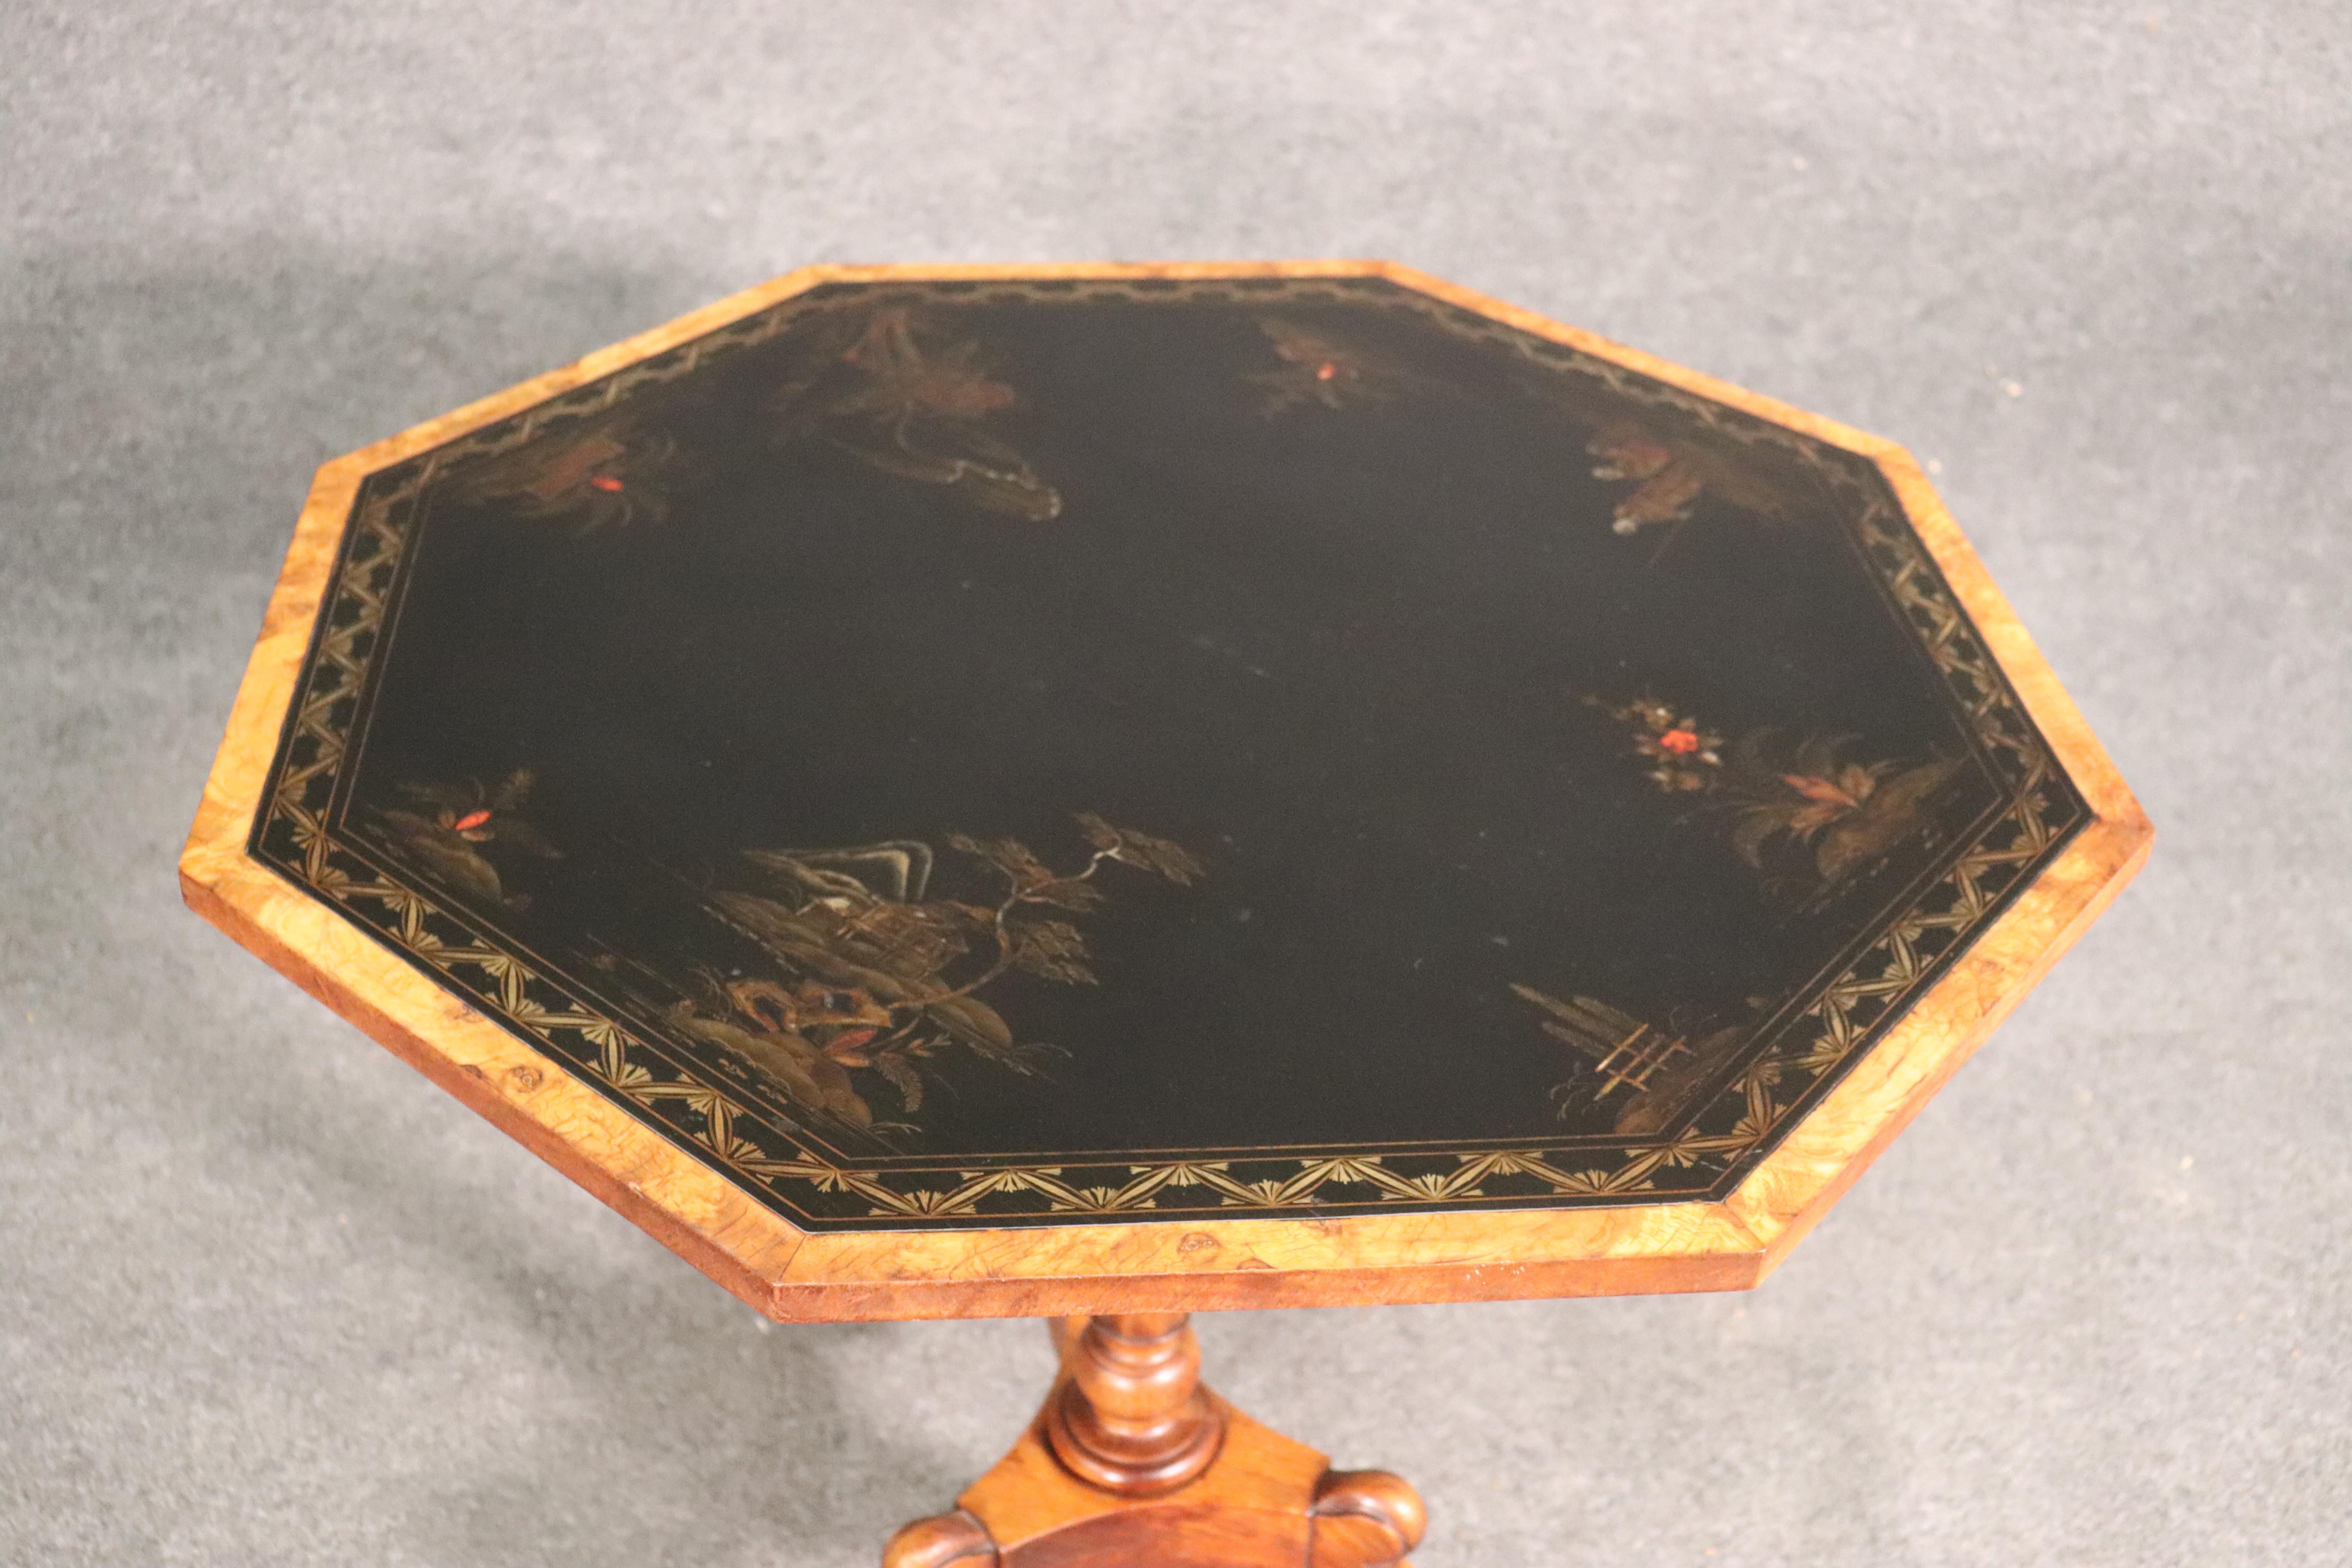 This is a fine quality chinoiserie paint decorated octangonal table. Perfect for use as a center table or occasional lamp table. The table is in good condition and features raised hand painted scenery. Measures: 29 wide x 29 wide x 28.25 tall.